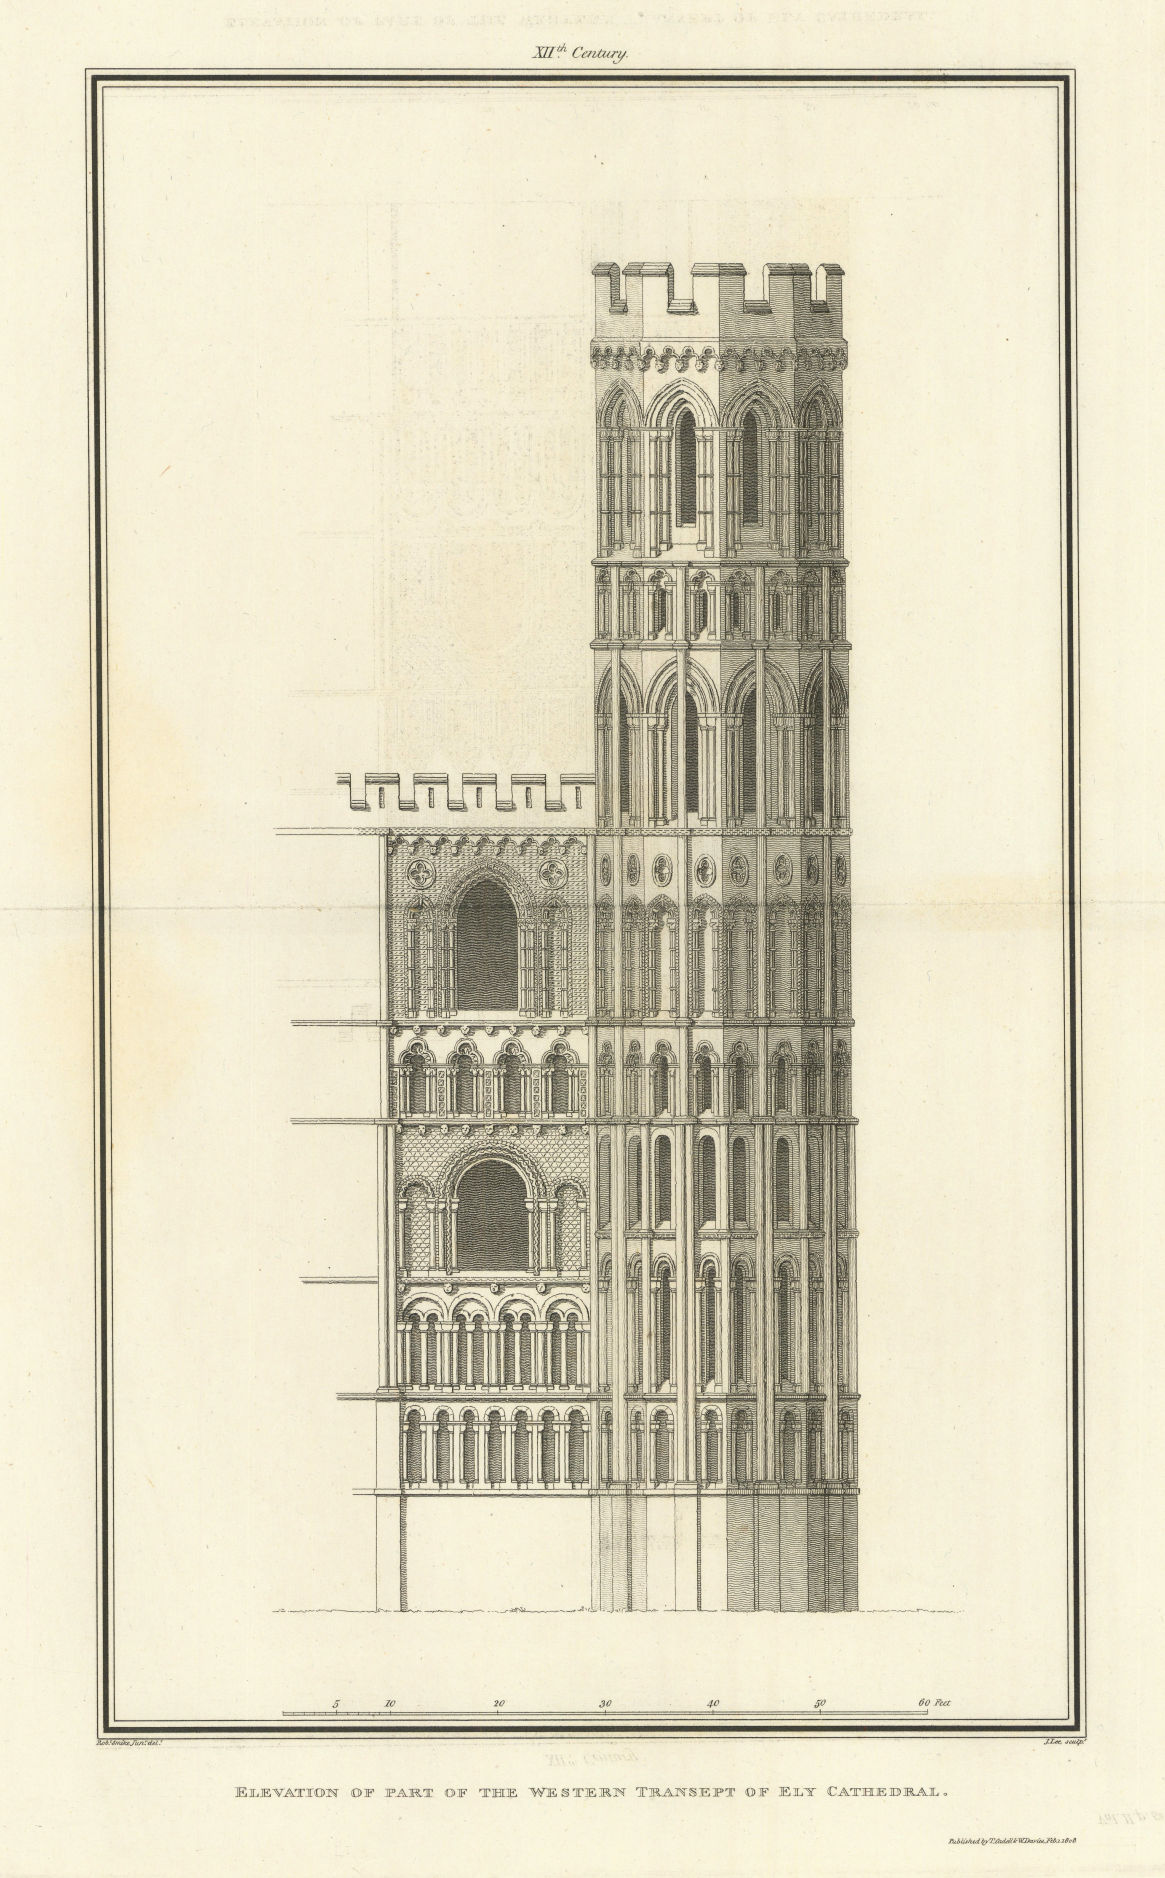 Elevation of part of the Western Transept of Ely Cathedral. SMIRKE 1810 print